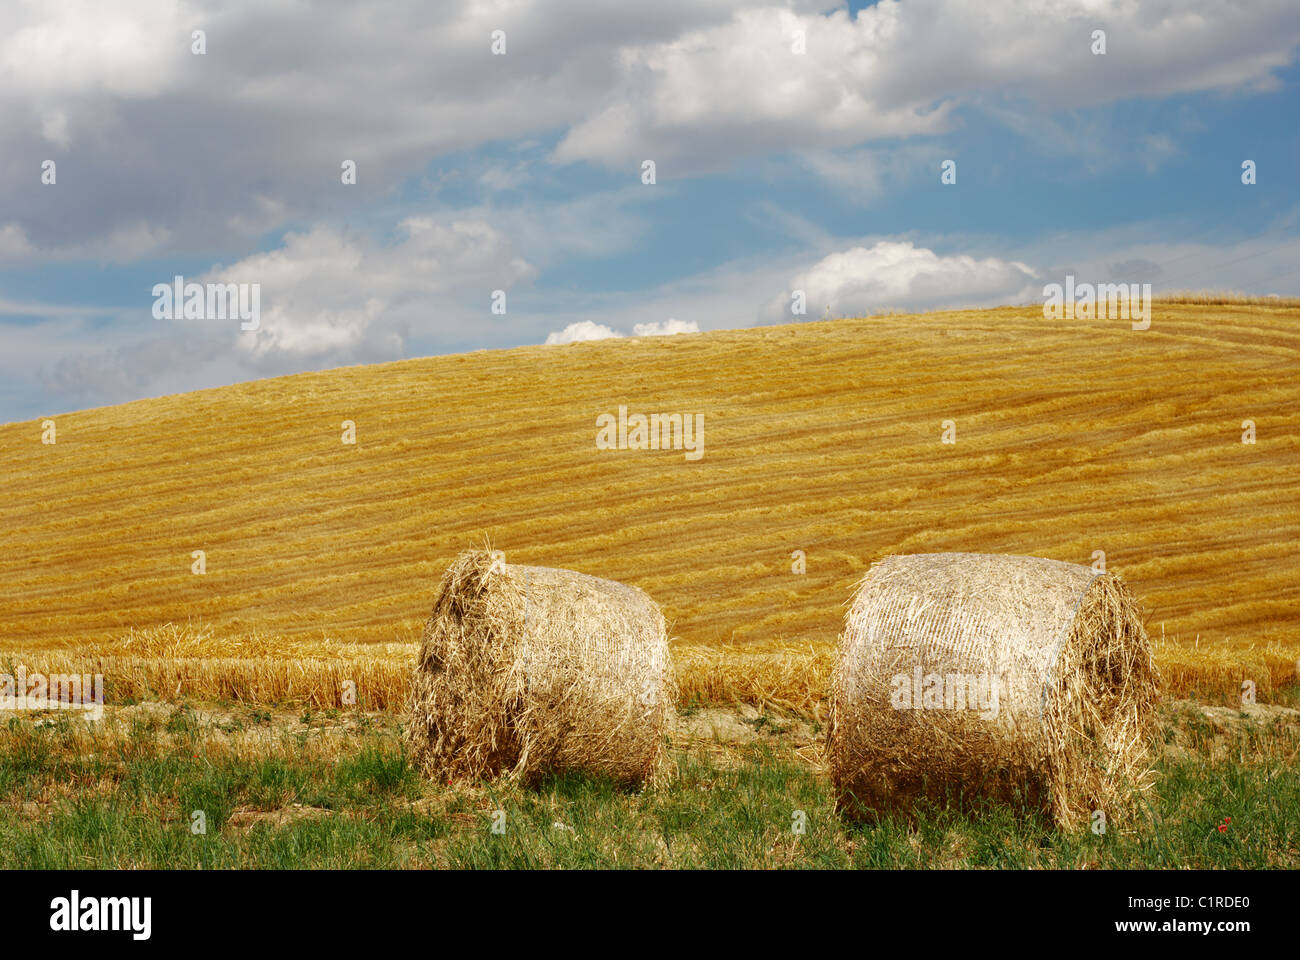 Straw bales in field with beautiful moody sky Stock Photo